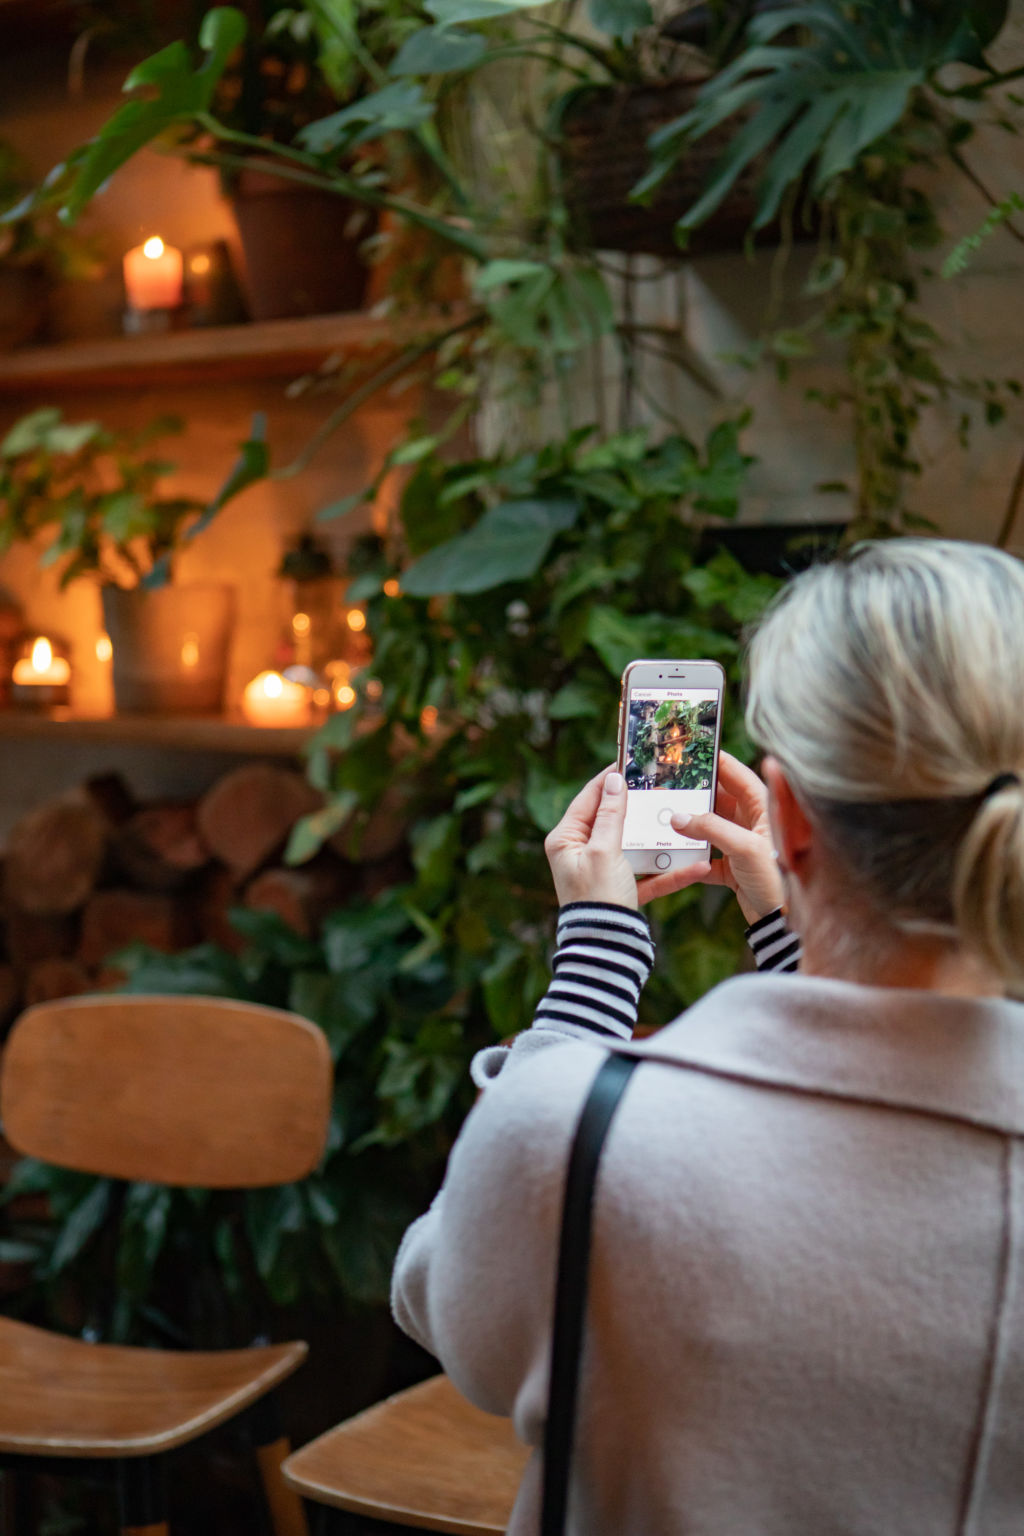 Social media is shaping how we buy indoor plants. Photo: Plant Life Balance